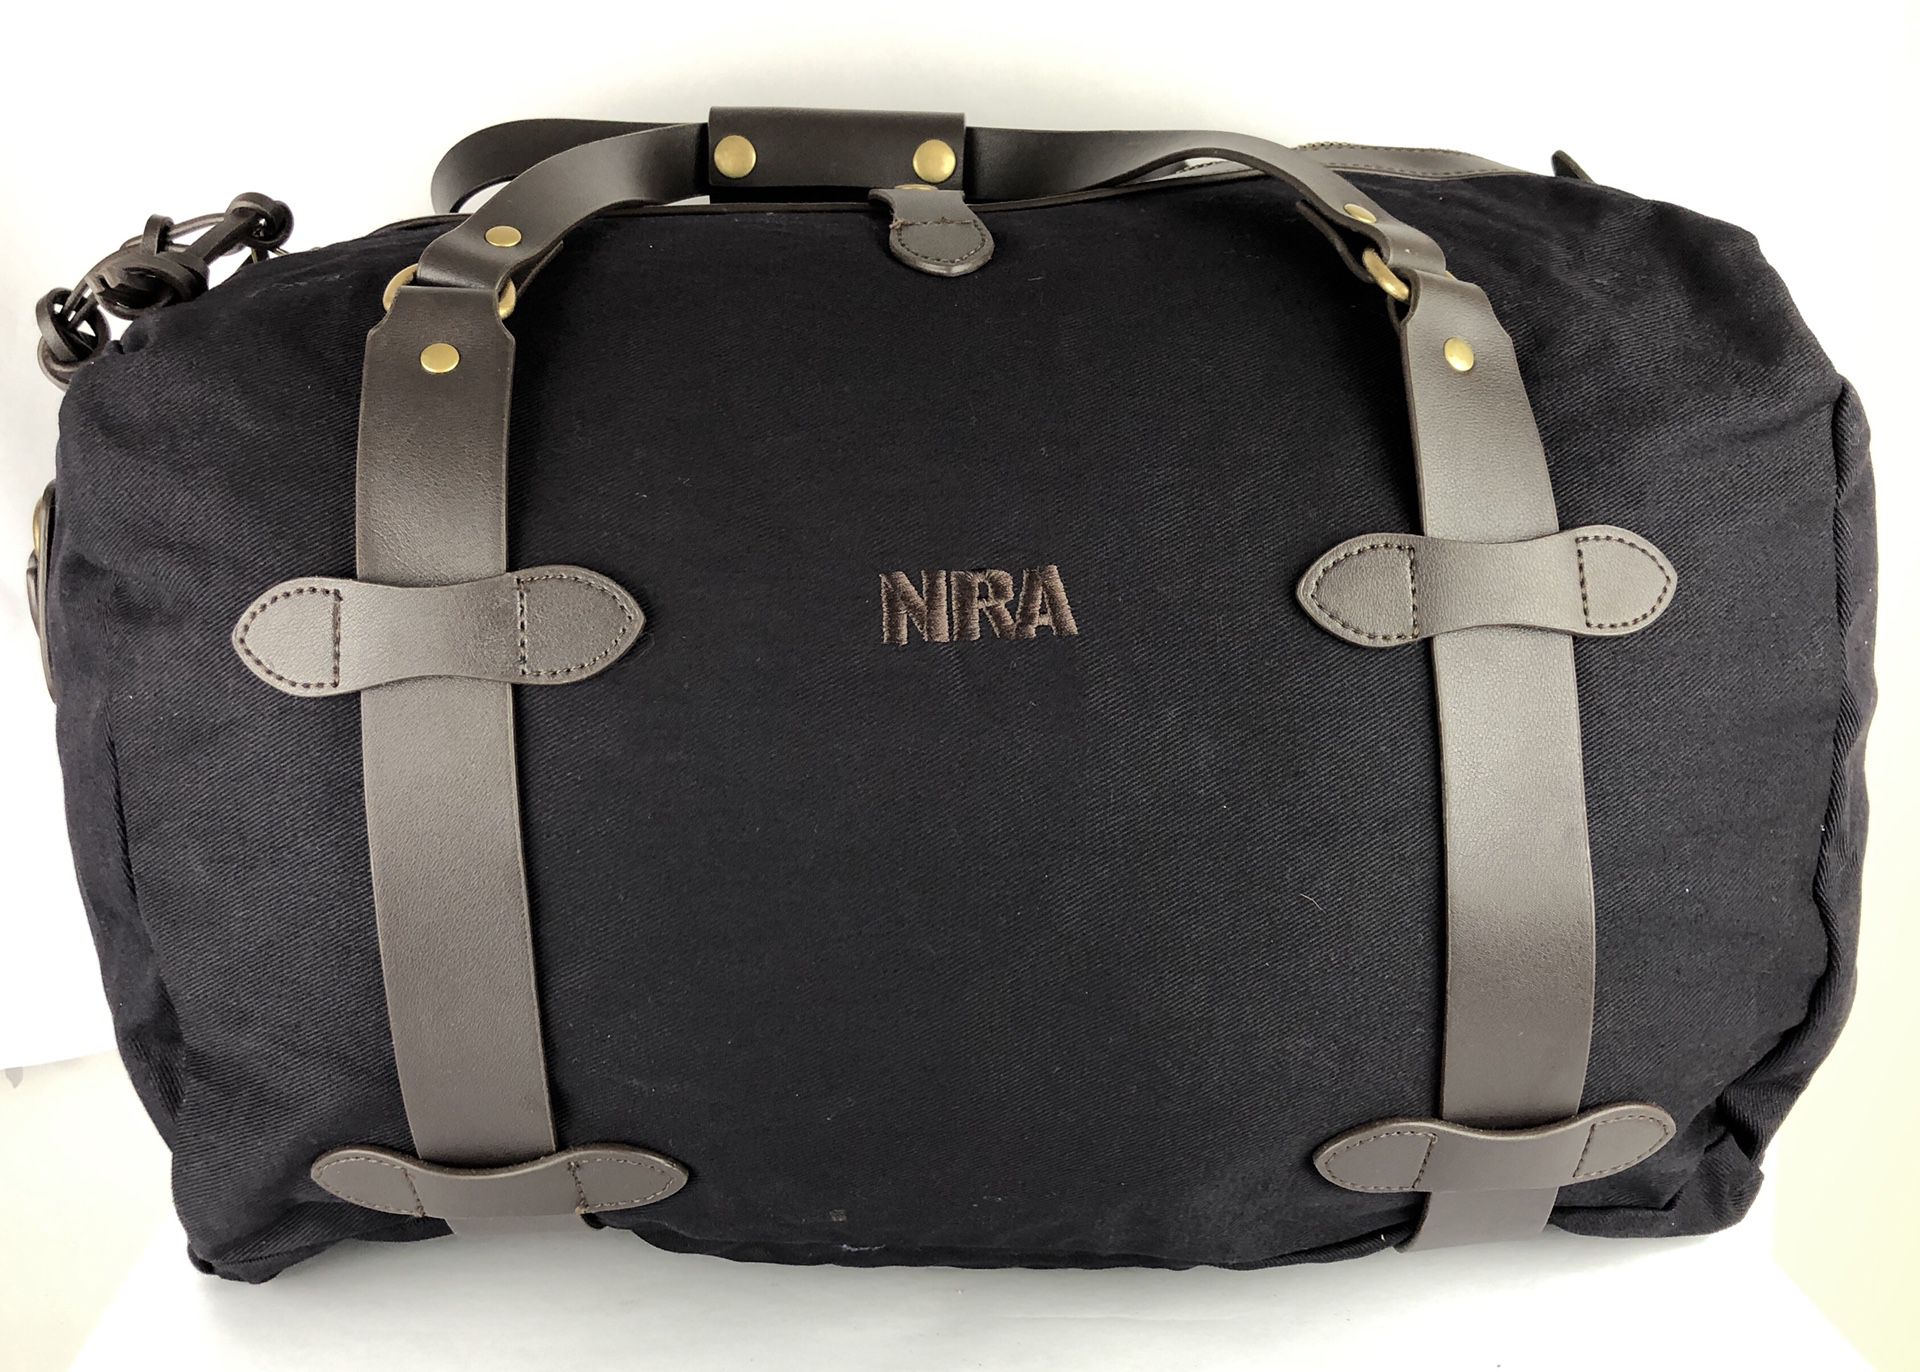 NRA duffle bag pristine condition. 20x14x12 well made high quality! Bell rd 35th Ave